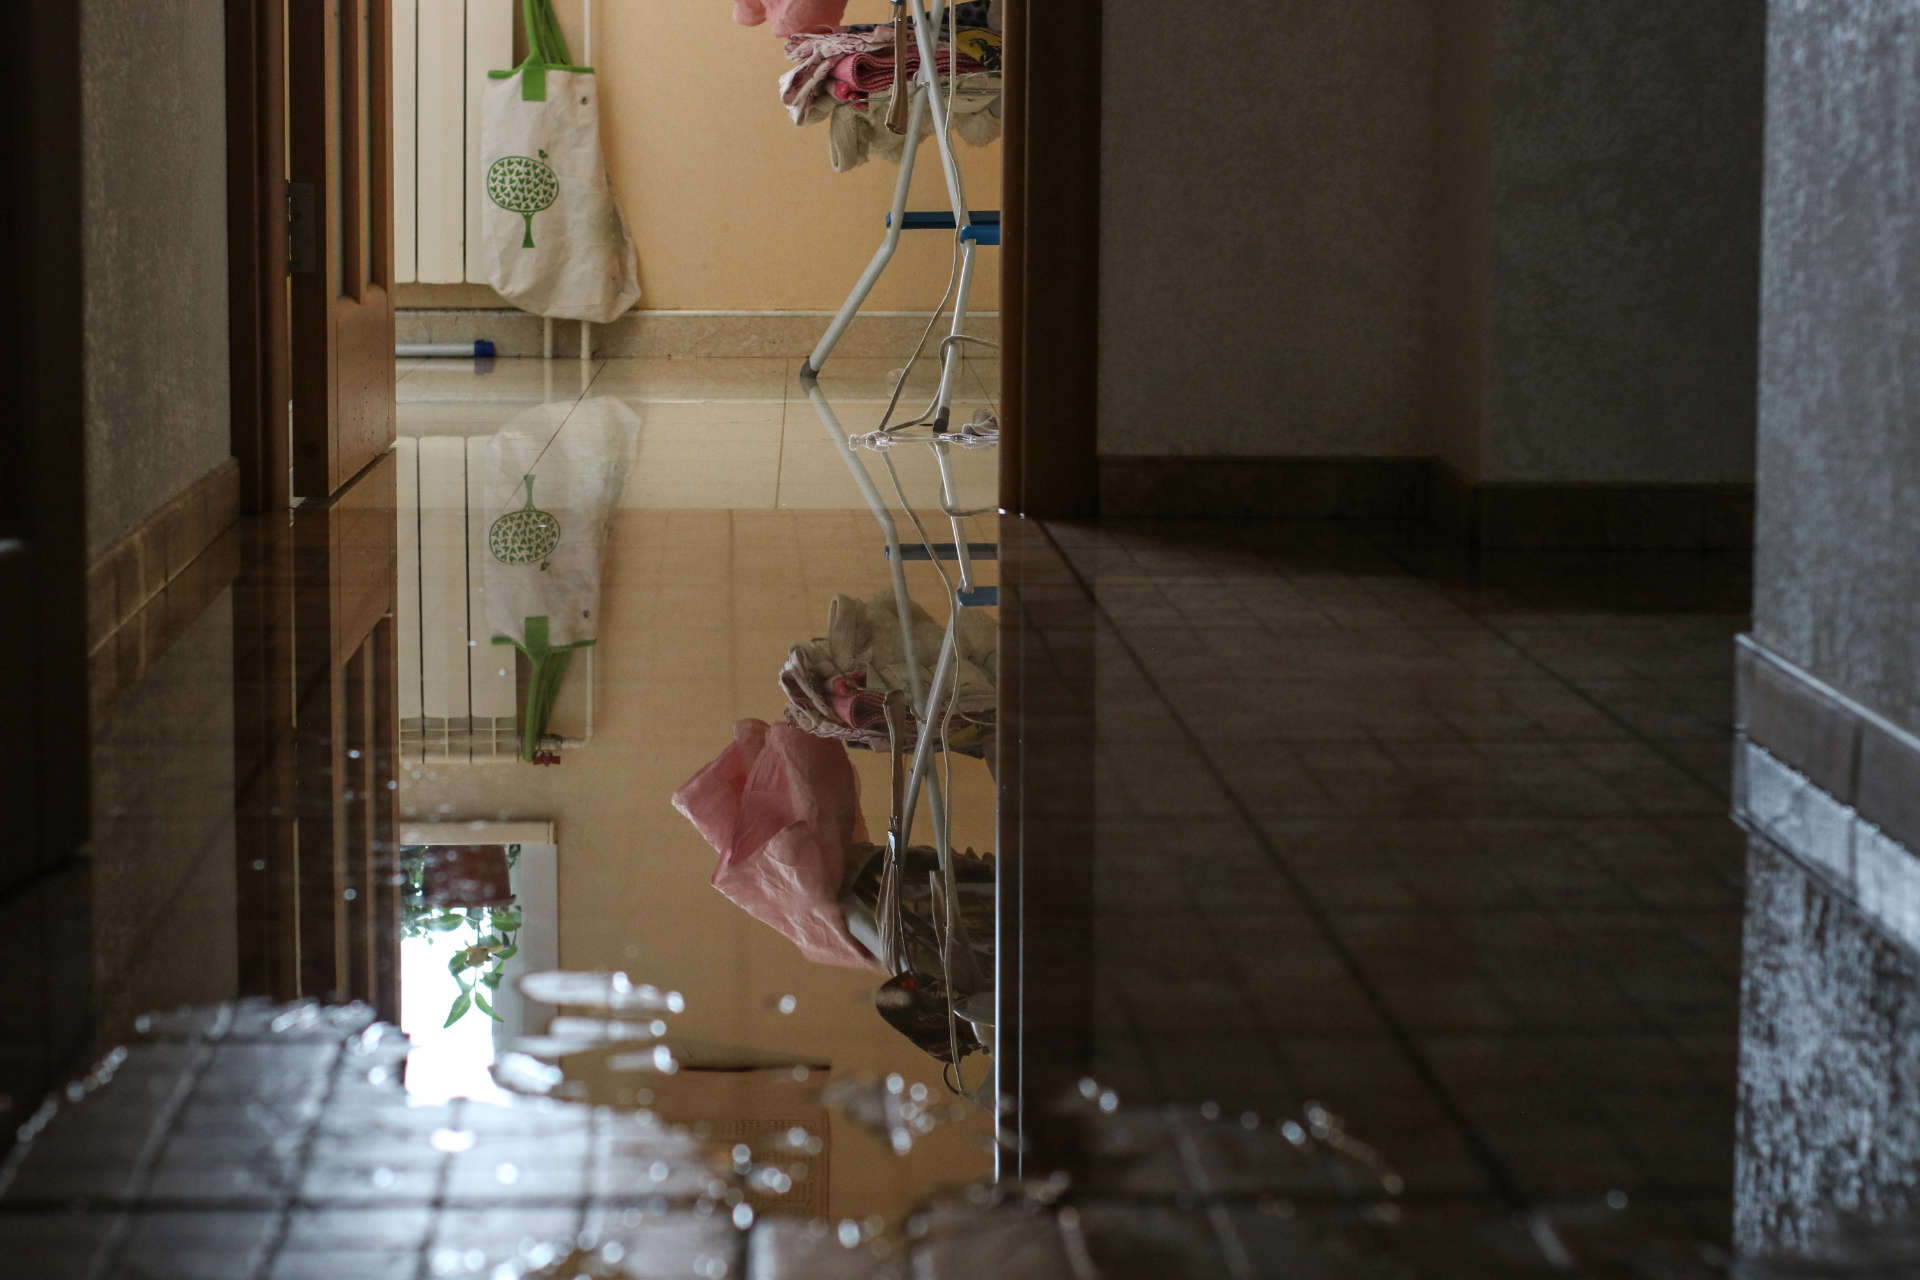 HOW SEVERE IS WATER DAMAGE?